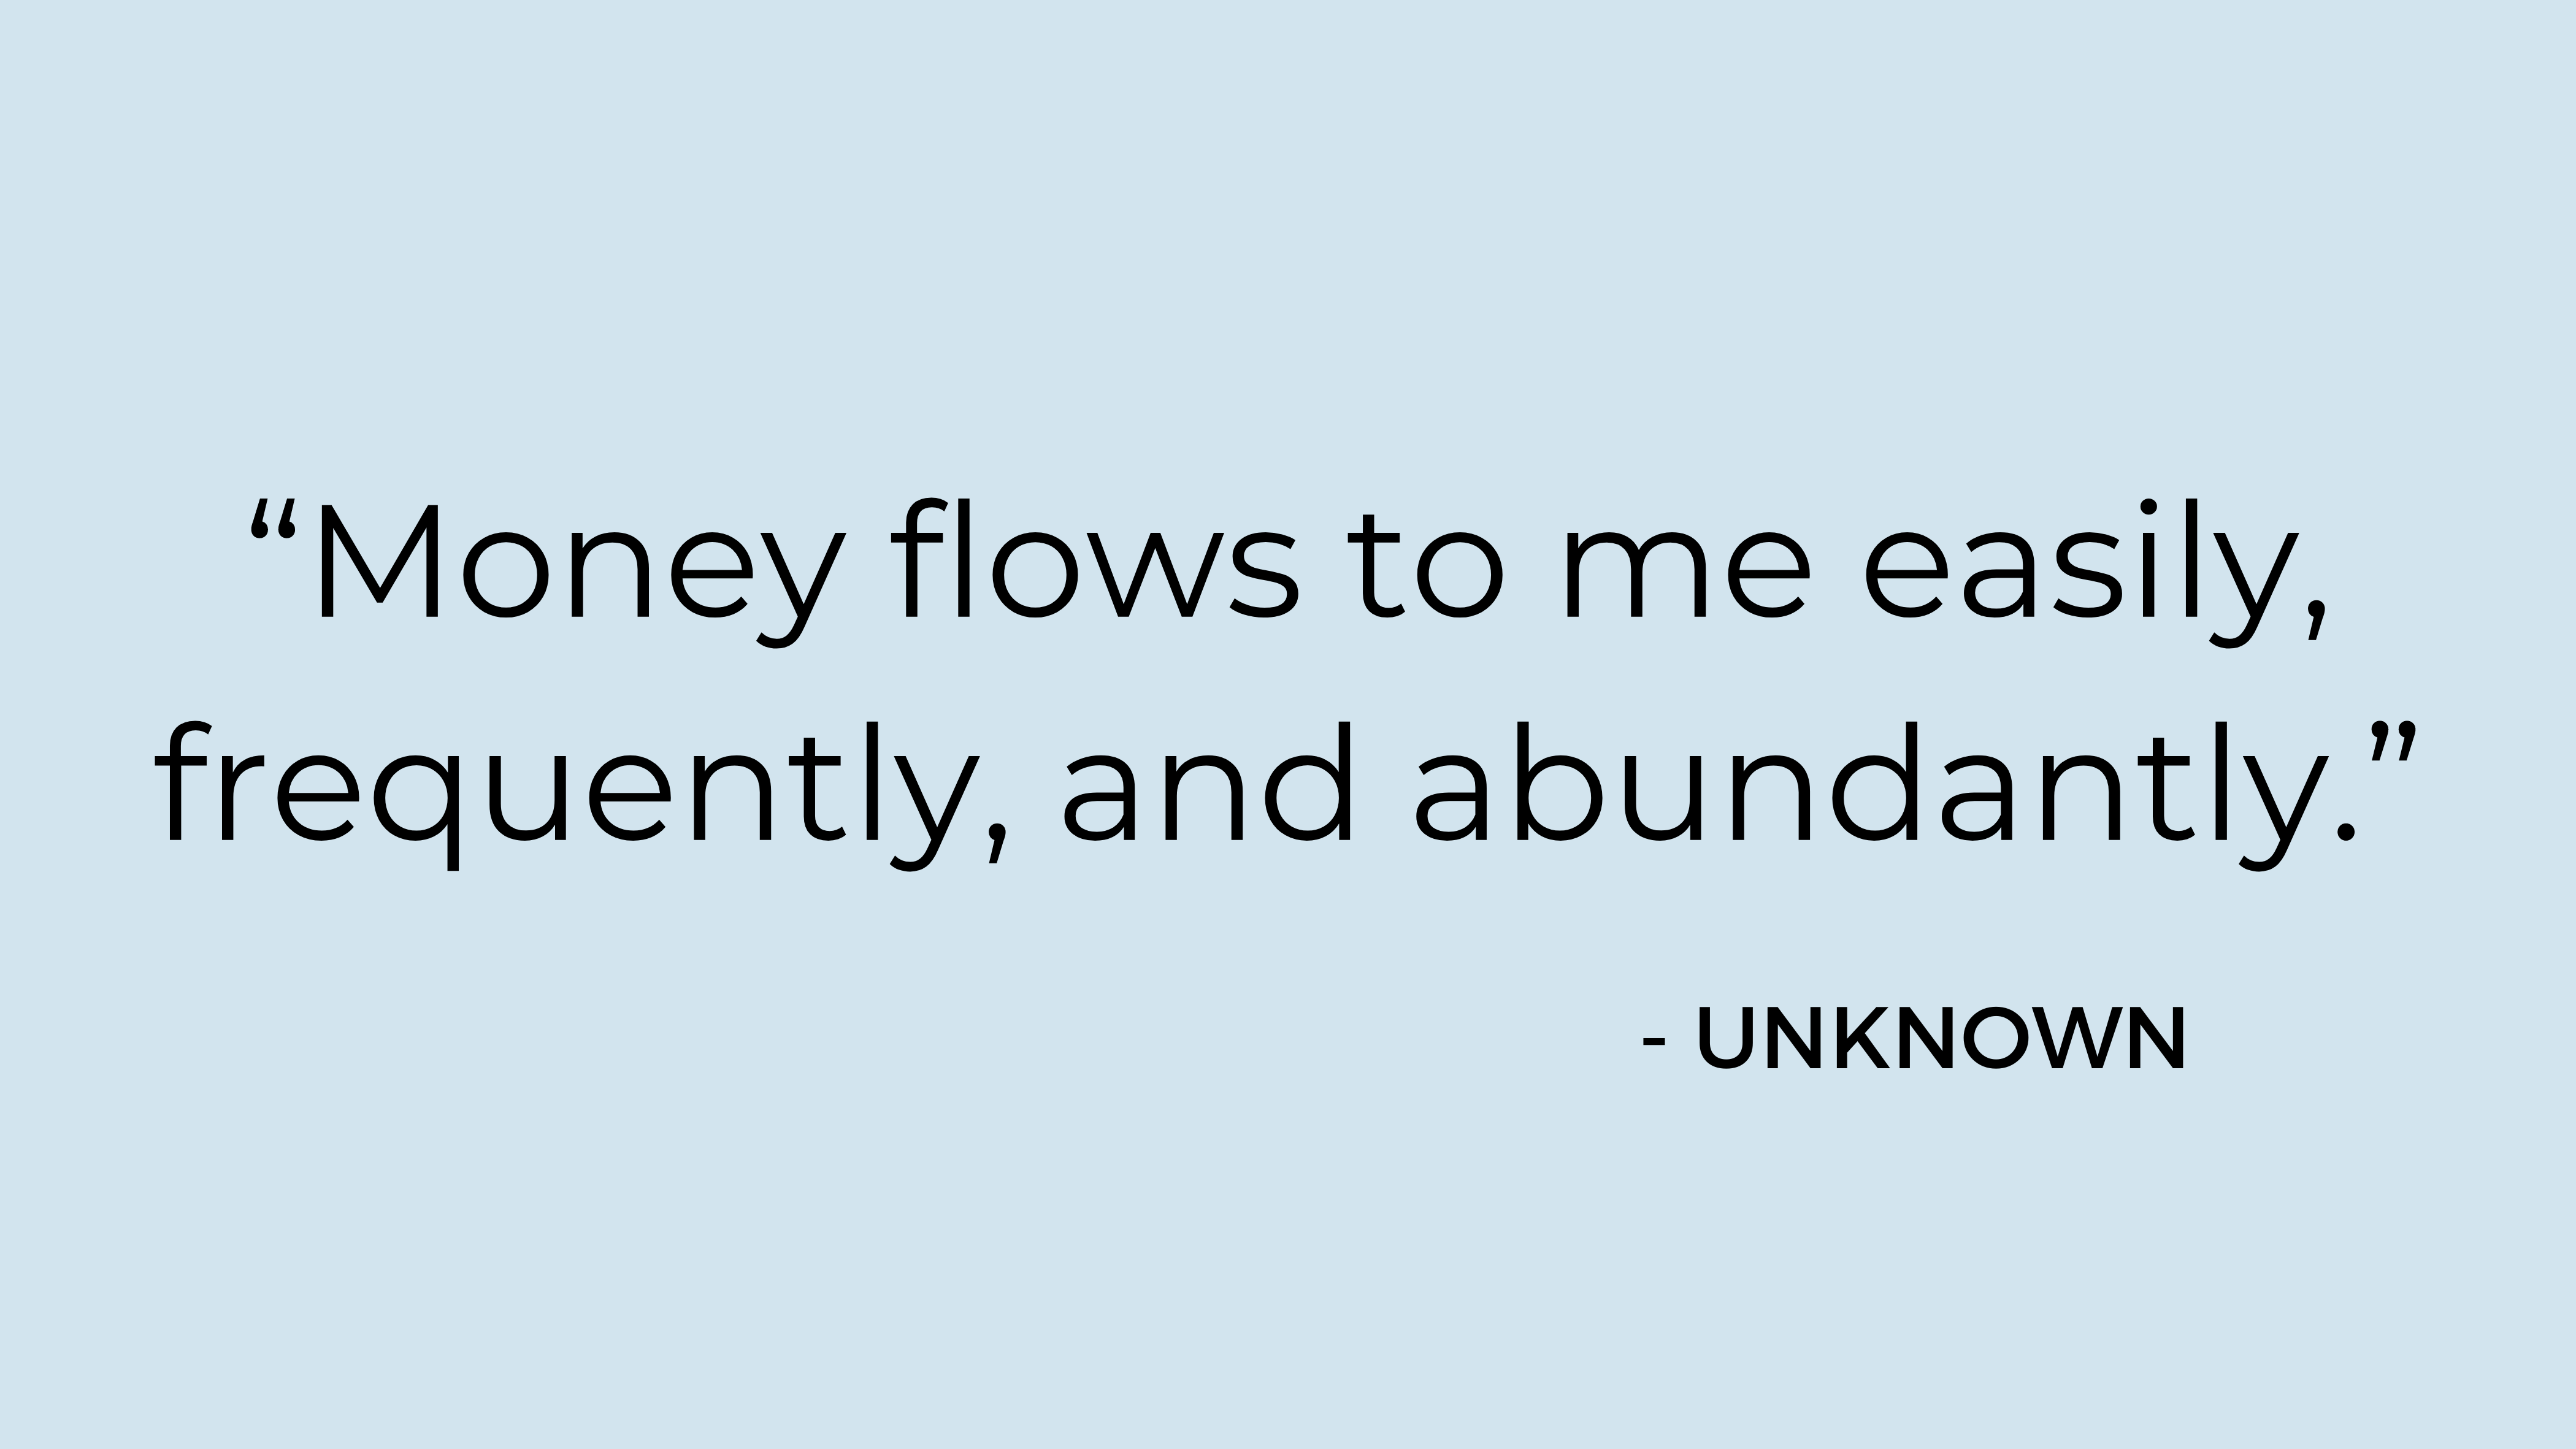 "Money flows to me easily, frequently, and abundantly." - Unknown